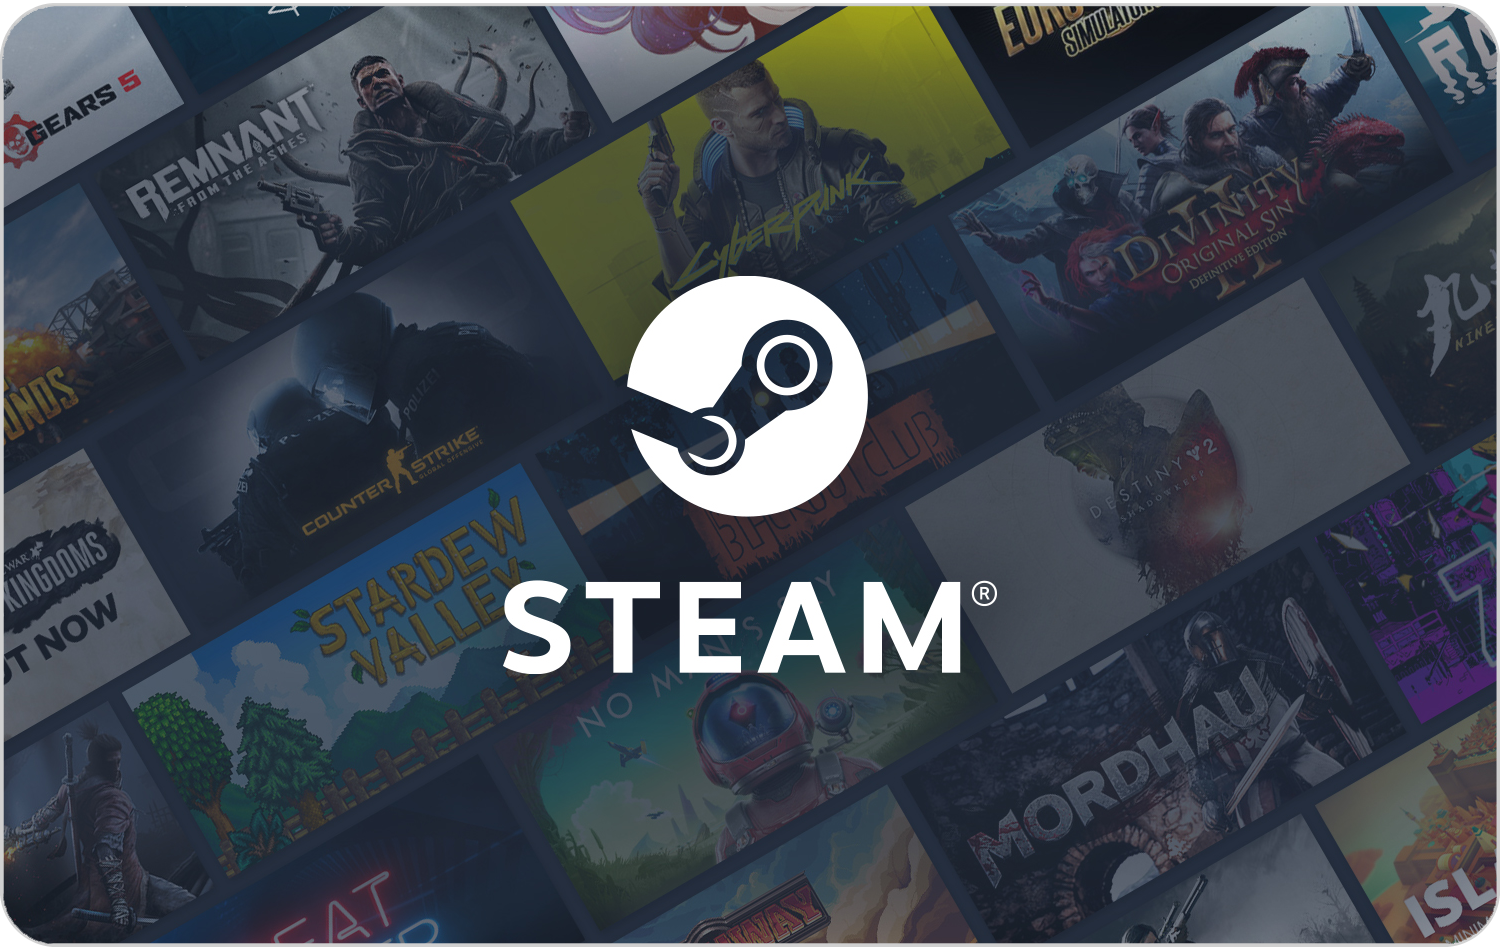 Buy a Steam Gift Card 20 TL TR - TURGAME - Steam Gift Cards